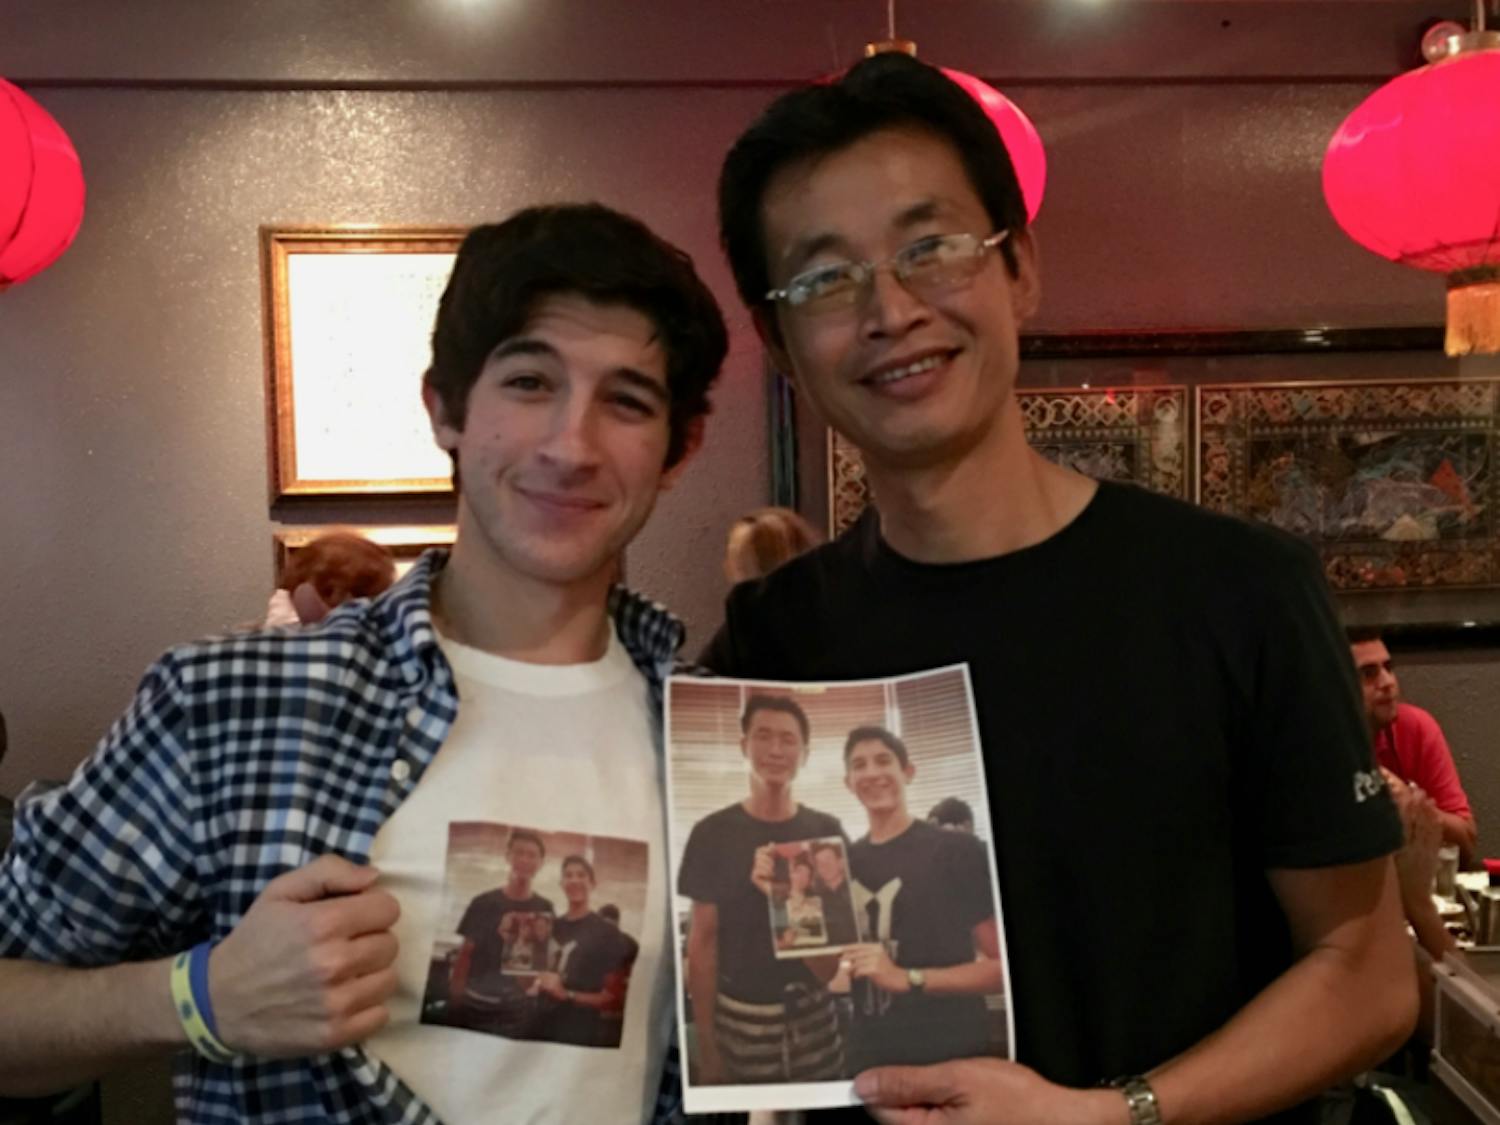 Besner (left) poses with waiter Peter Chung (right).